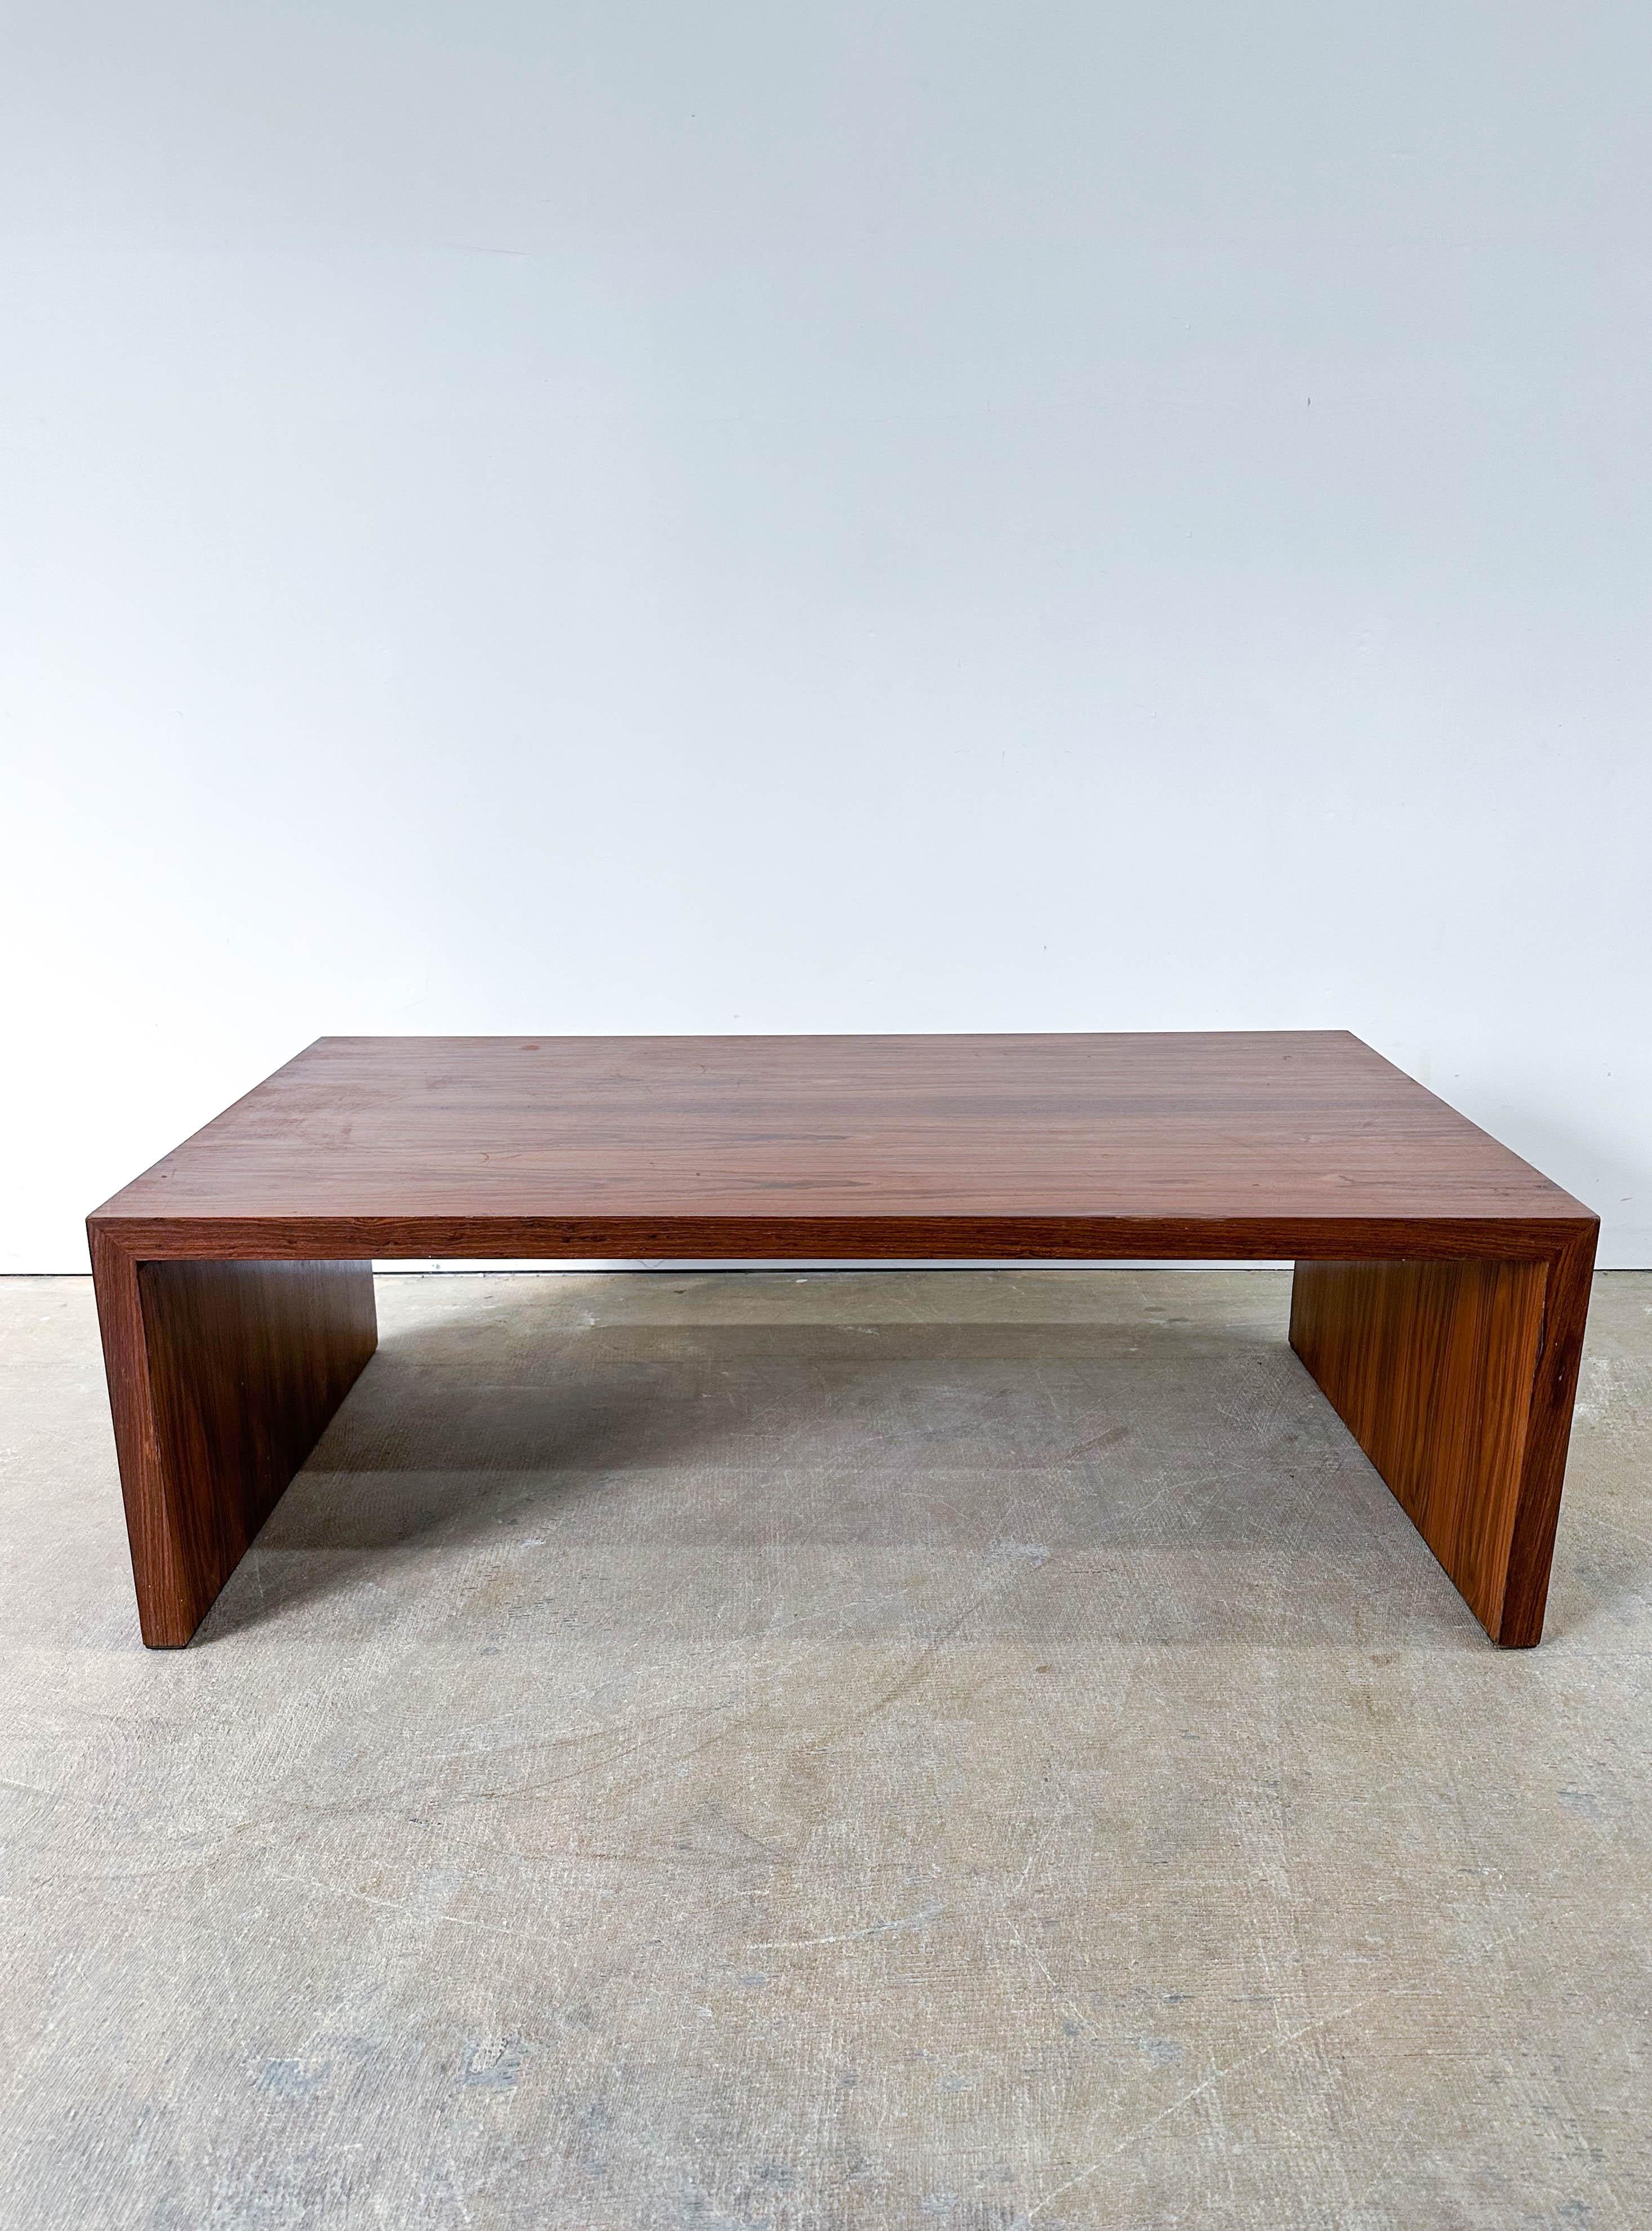 Uncommon Dunbar design in beautiful walnut from the 1960s. Minimalist design is very functional and would make an excellent coffee table or large side table. Very solidly made with some excellent woodgrain. Table top is in great shape. One side of